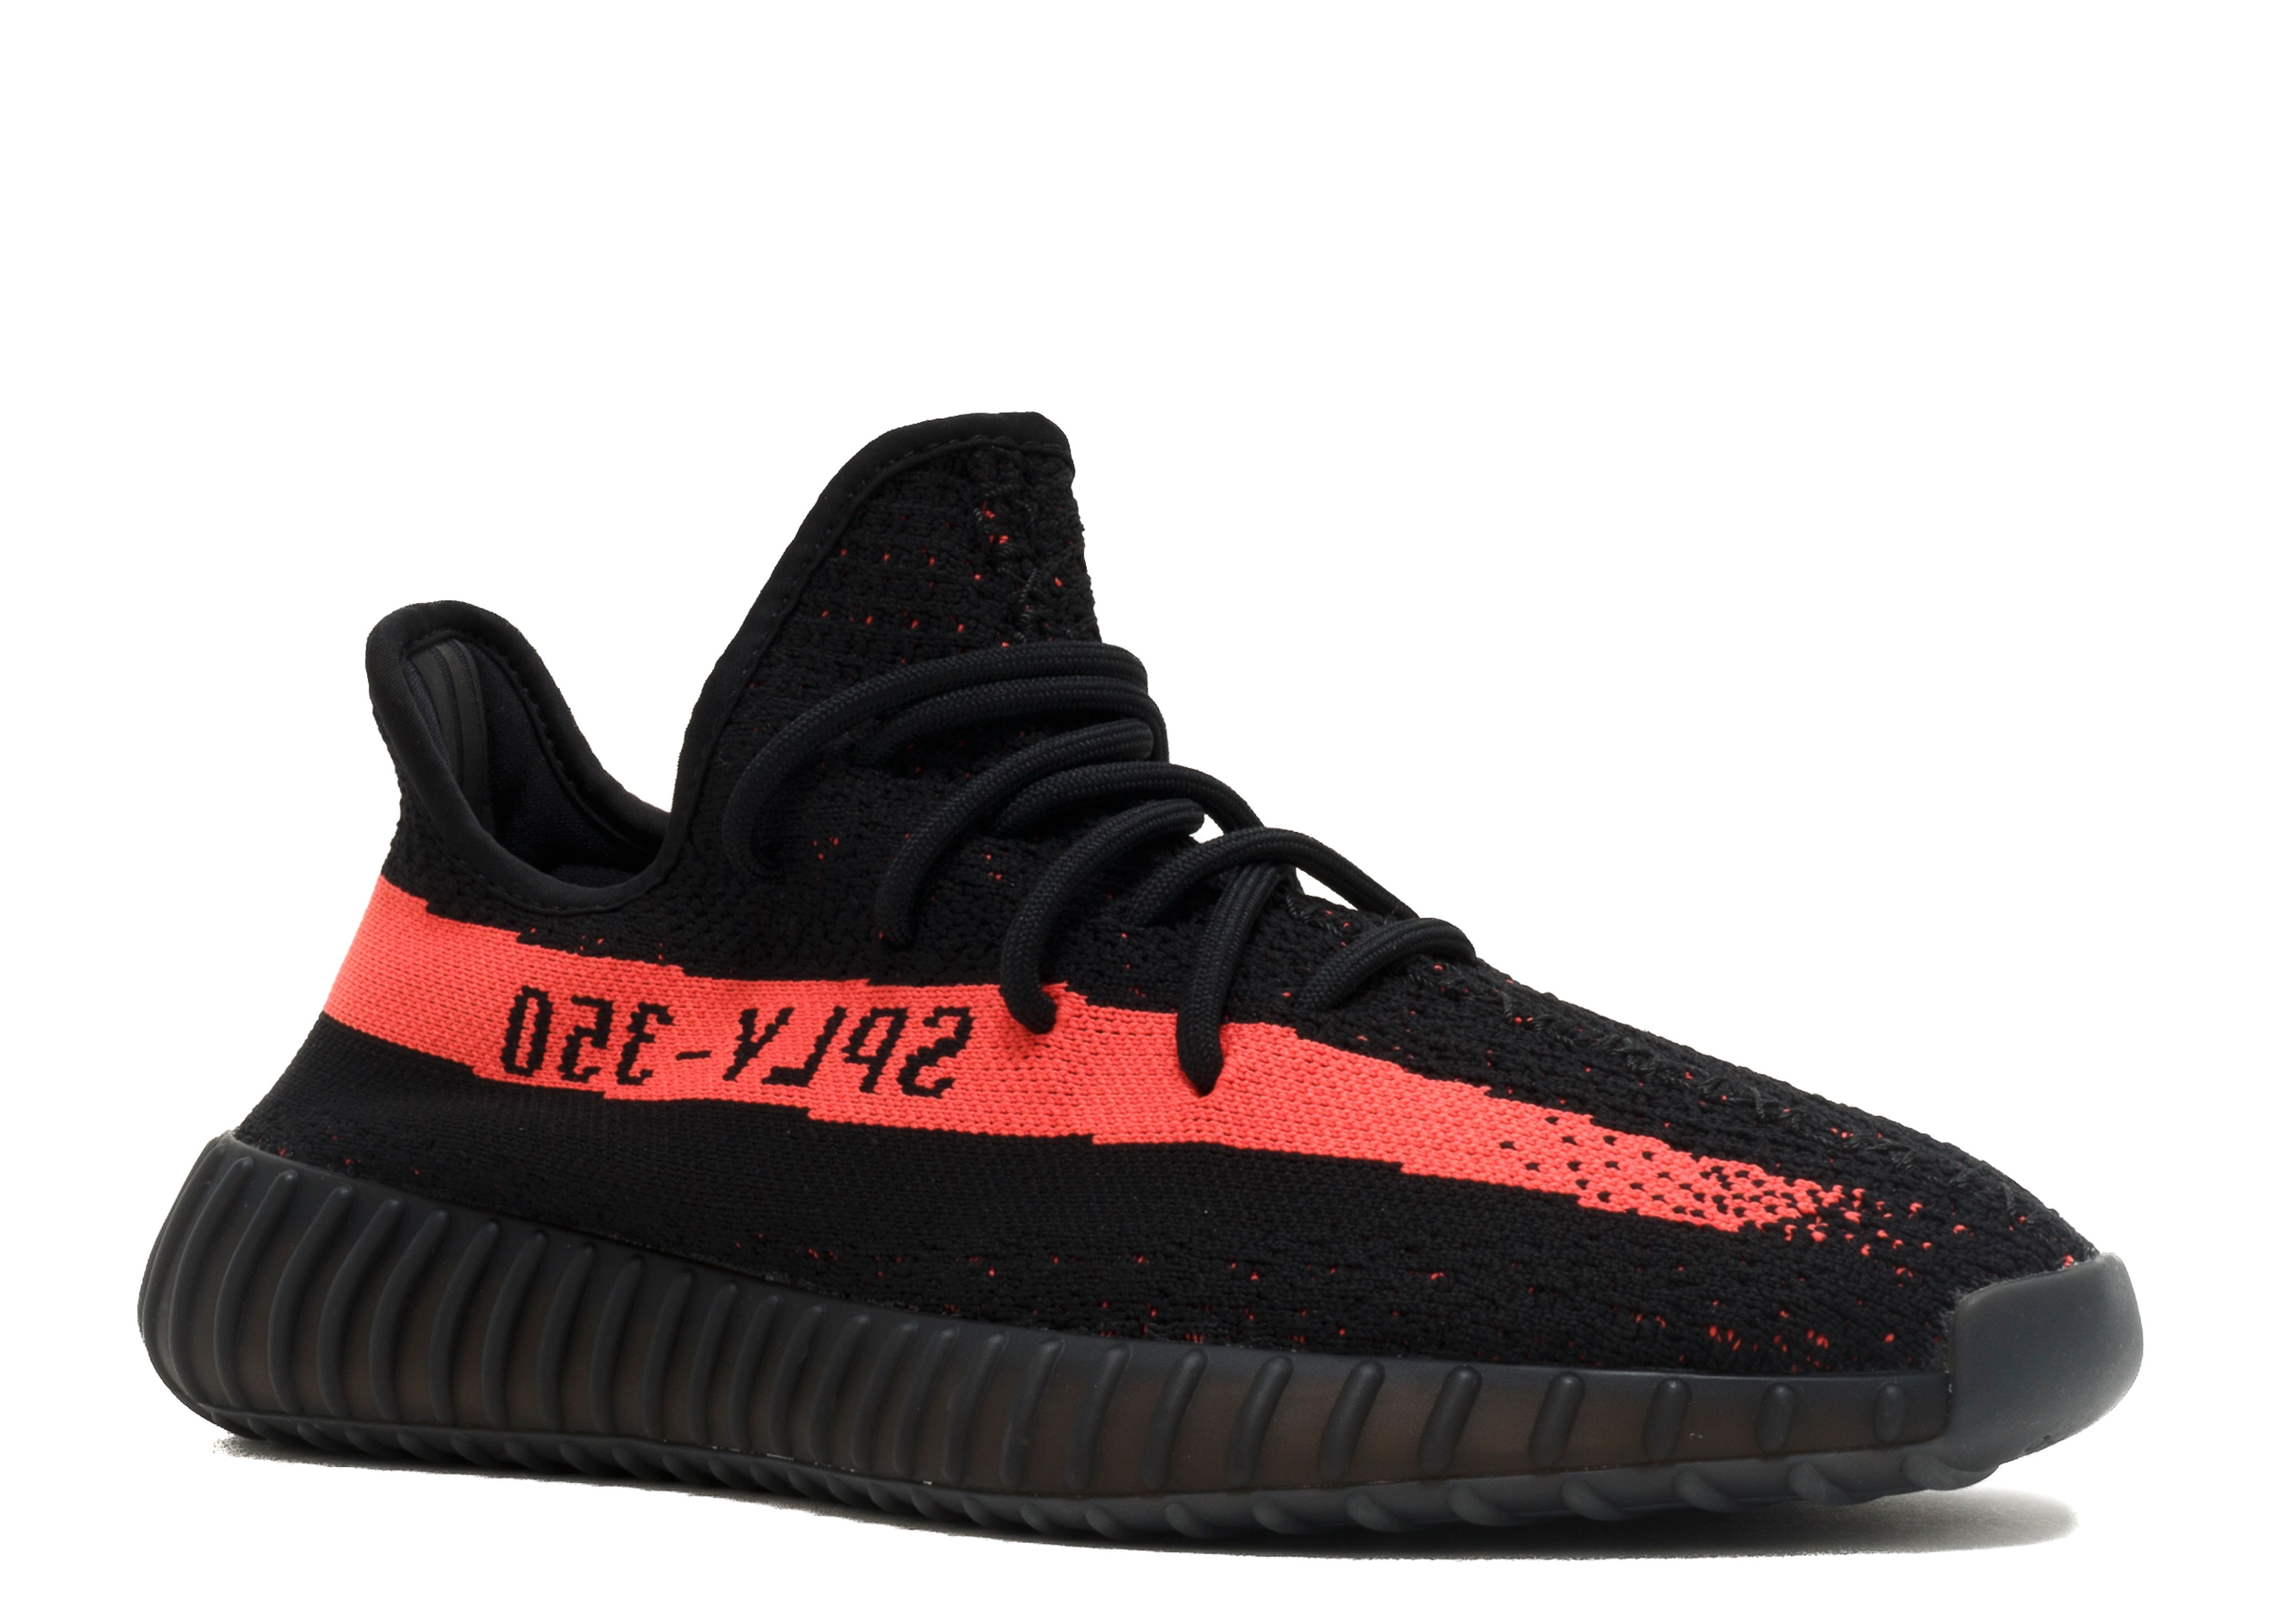 Adidas New Yeezy Boost 350 v2 Black realyeezybay HD Review on